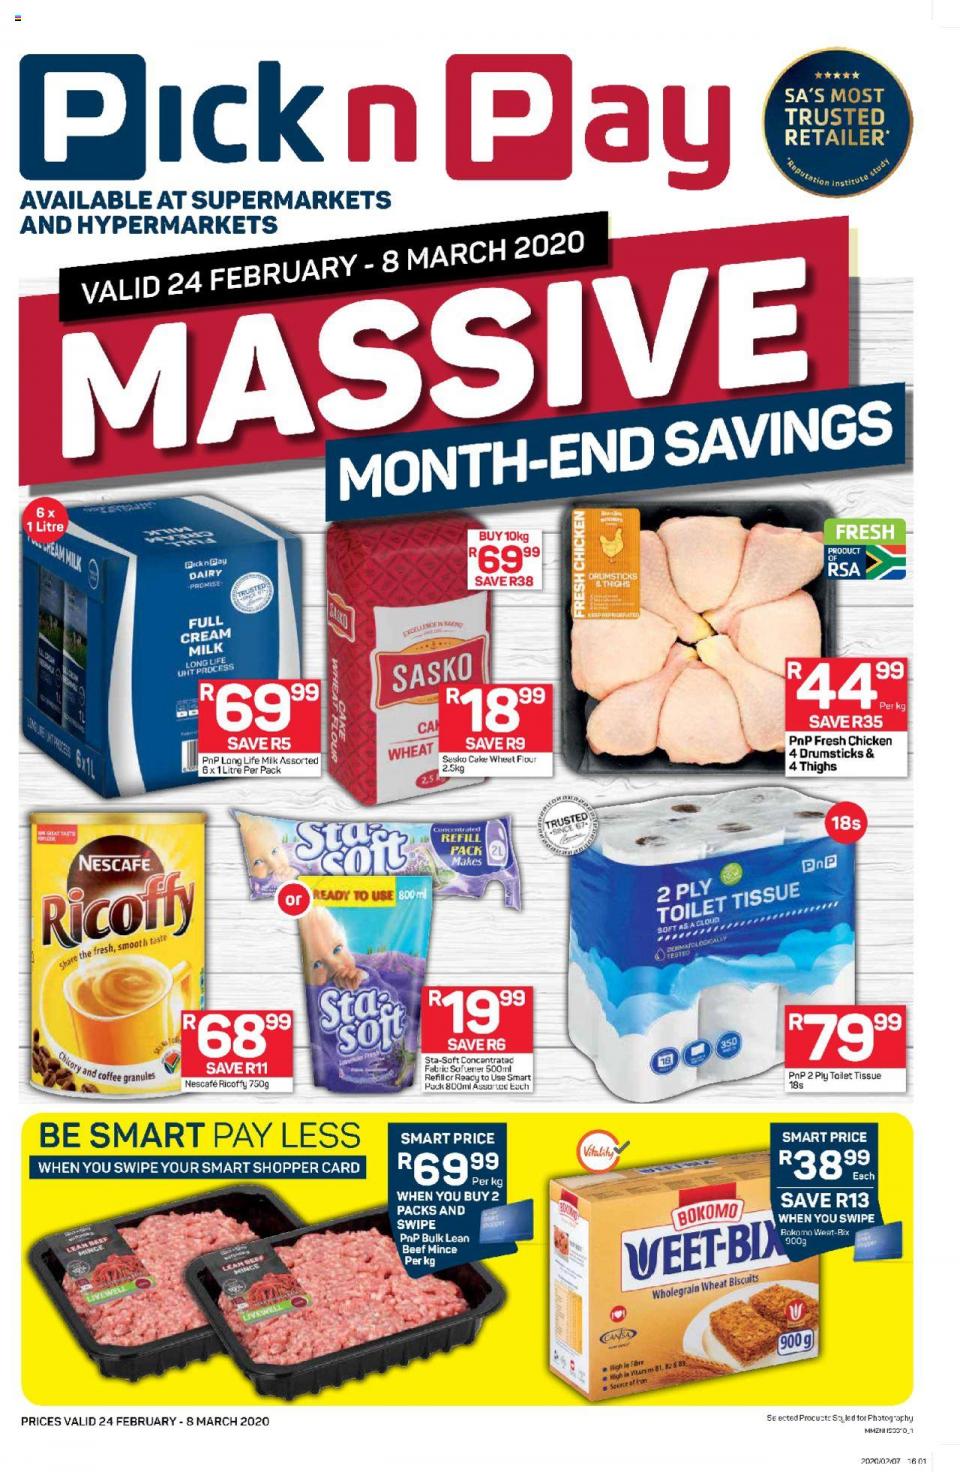 Pick n Pay Specials Massive Month-End Savings 24 February 2020